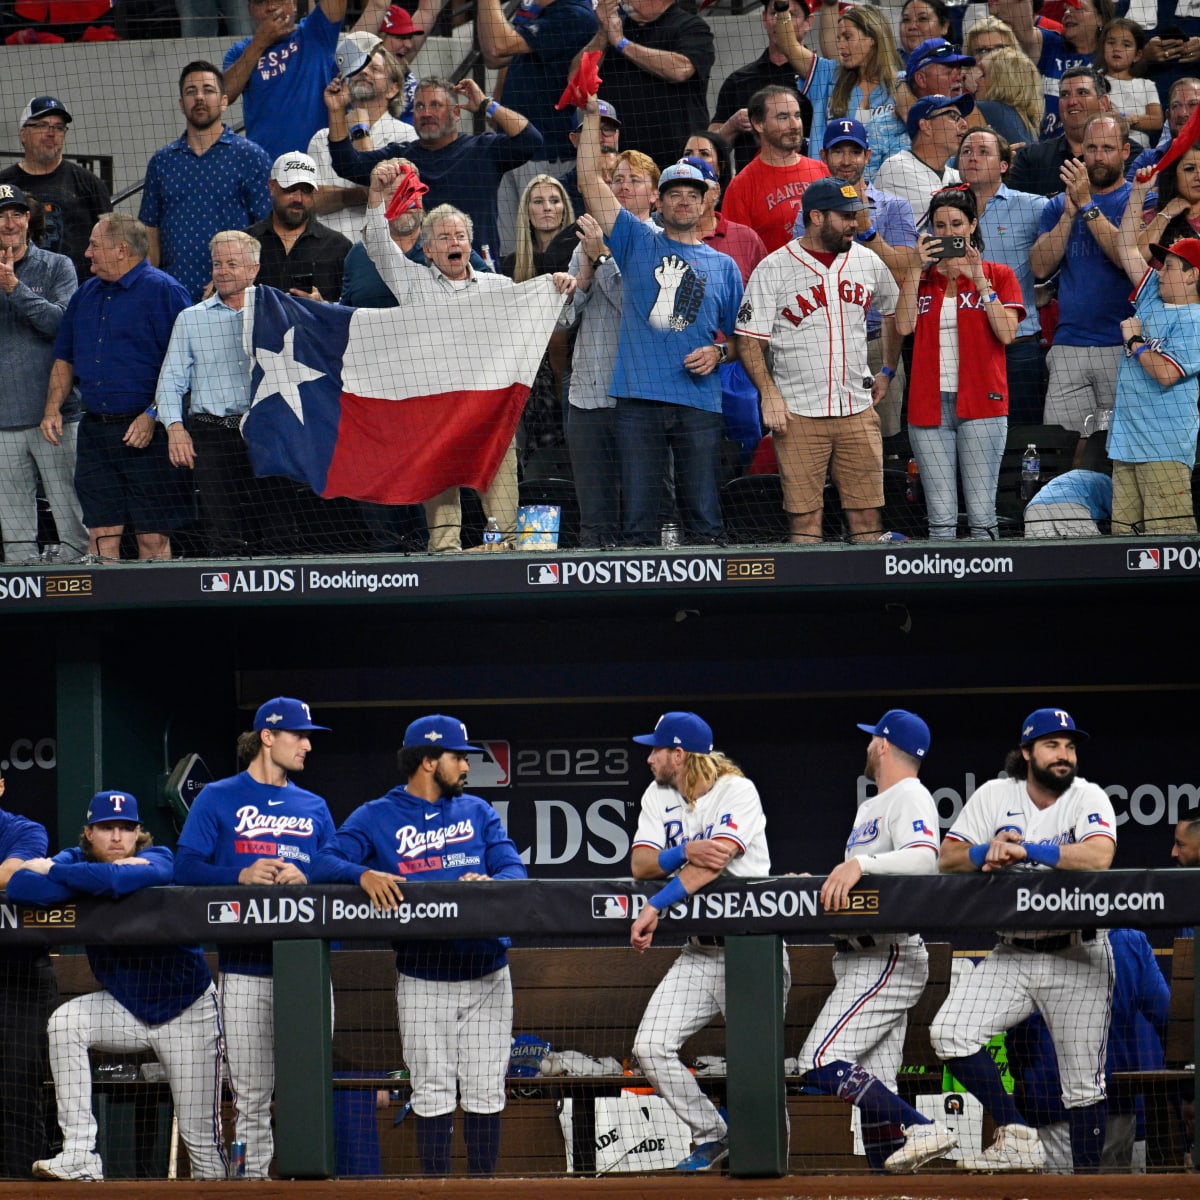 What did fans say after the Rangers shut out the Astros?